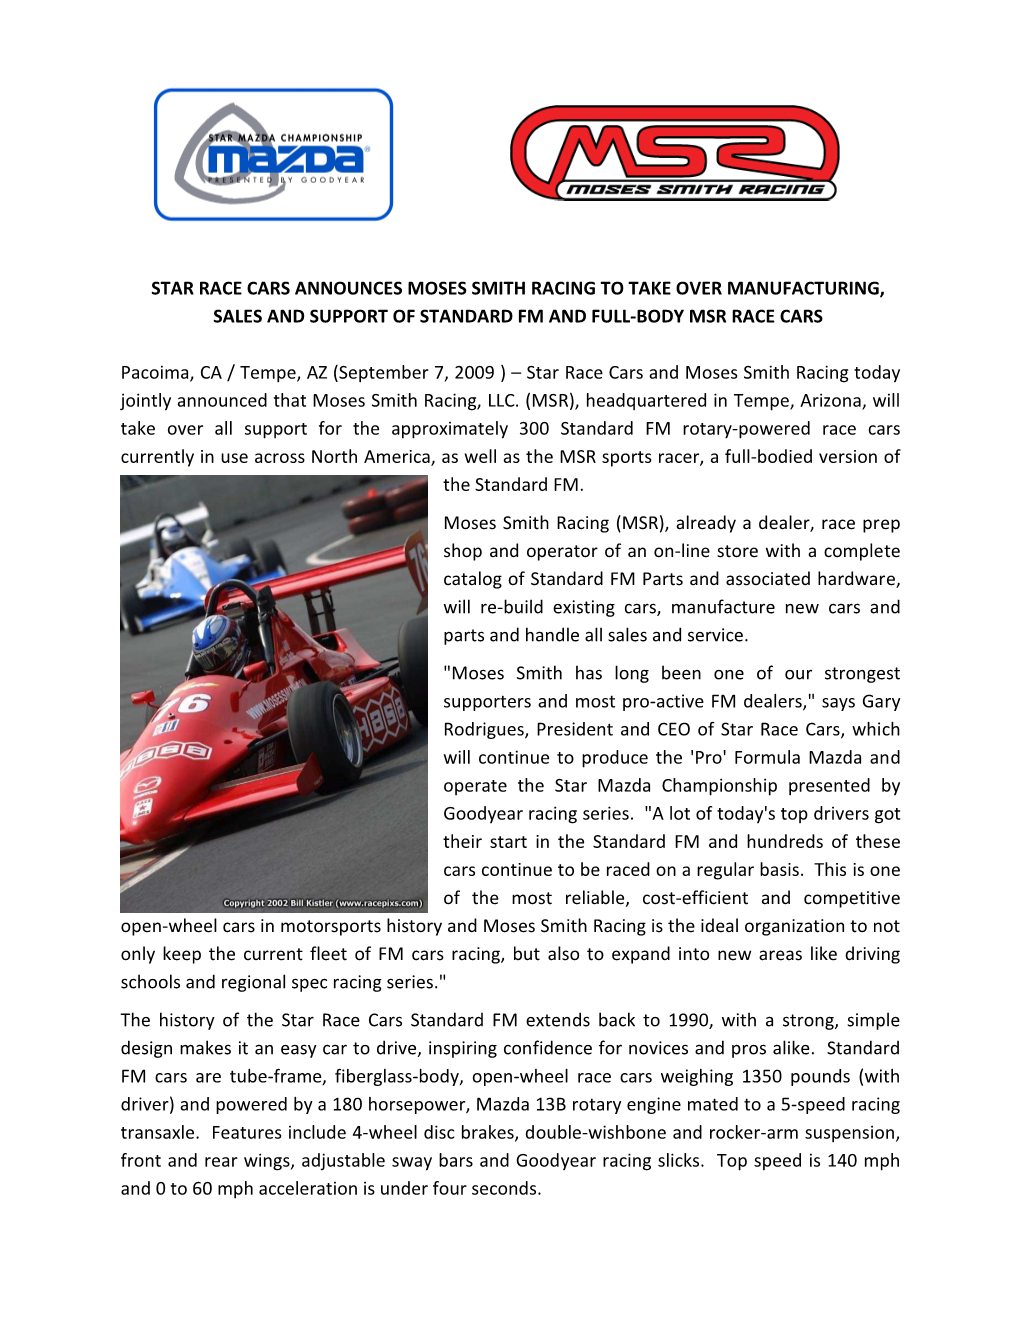 Star Race Cars Announces Moses Smith Racing to Take Over Manufacturing, Sales and Support of Standard Fm and Full-Body Msr Race Cars